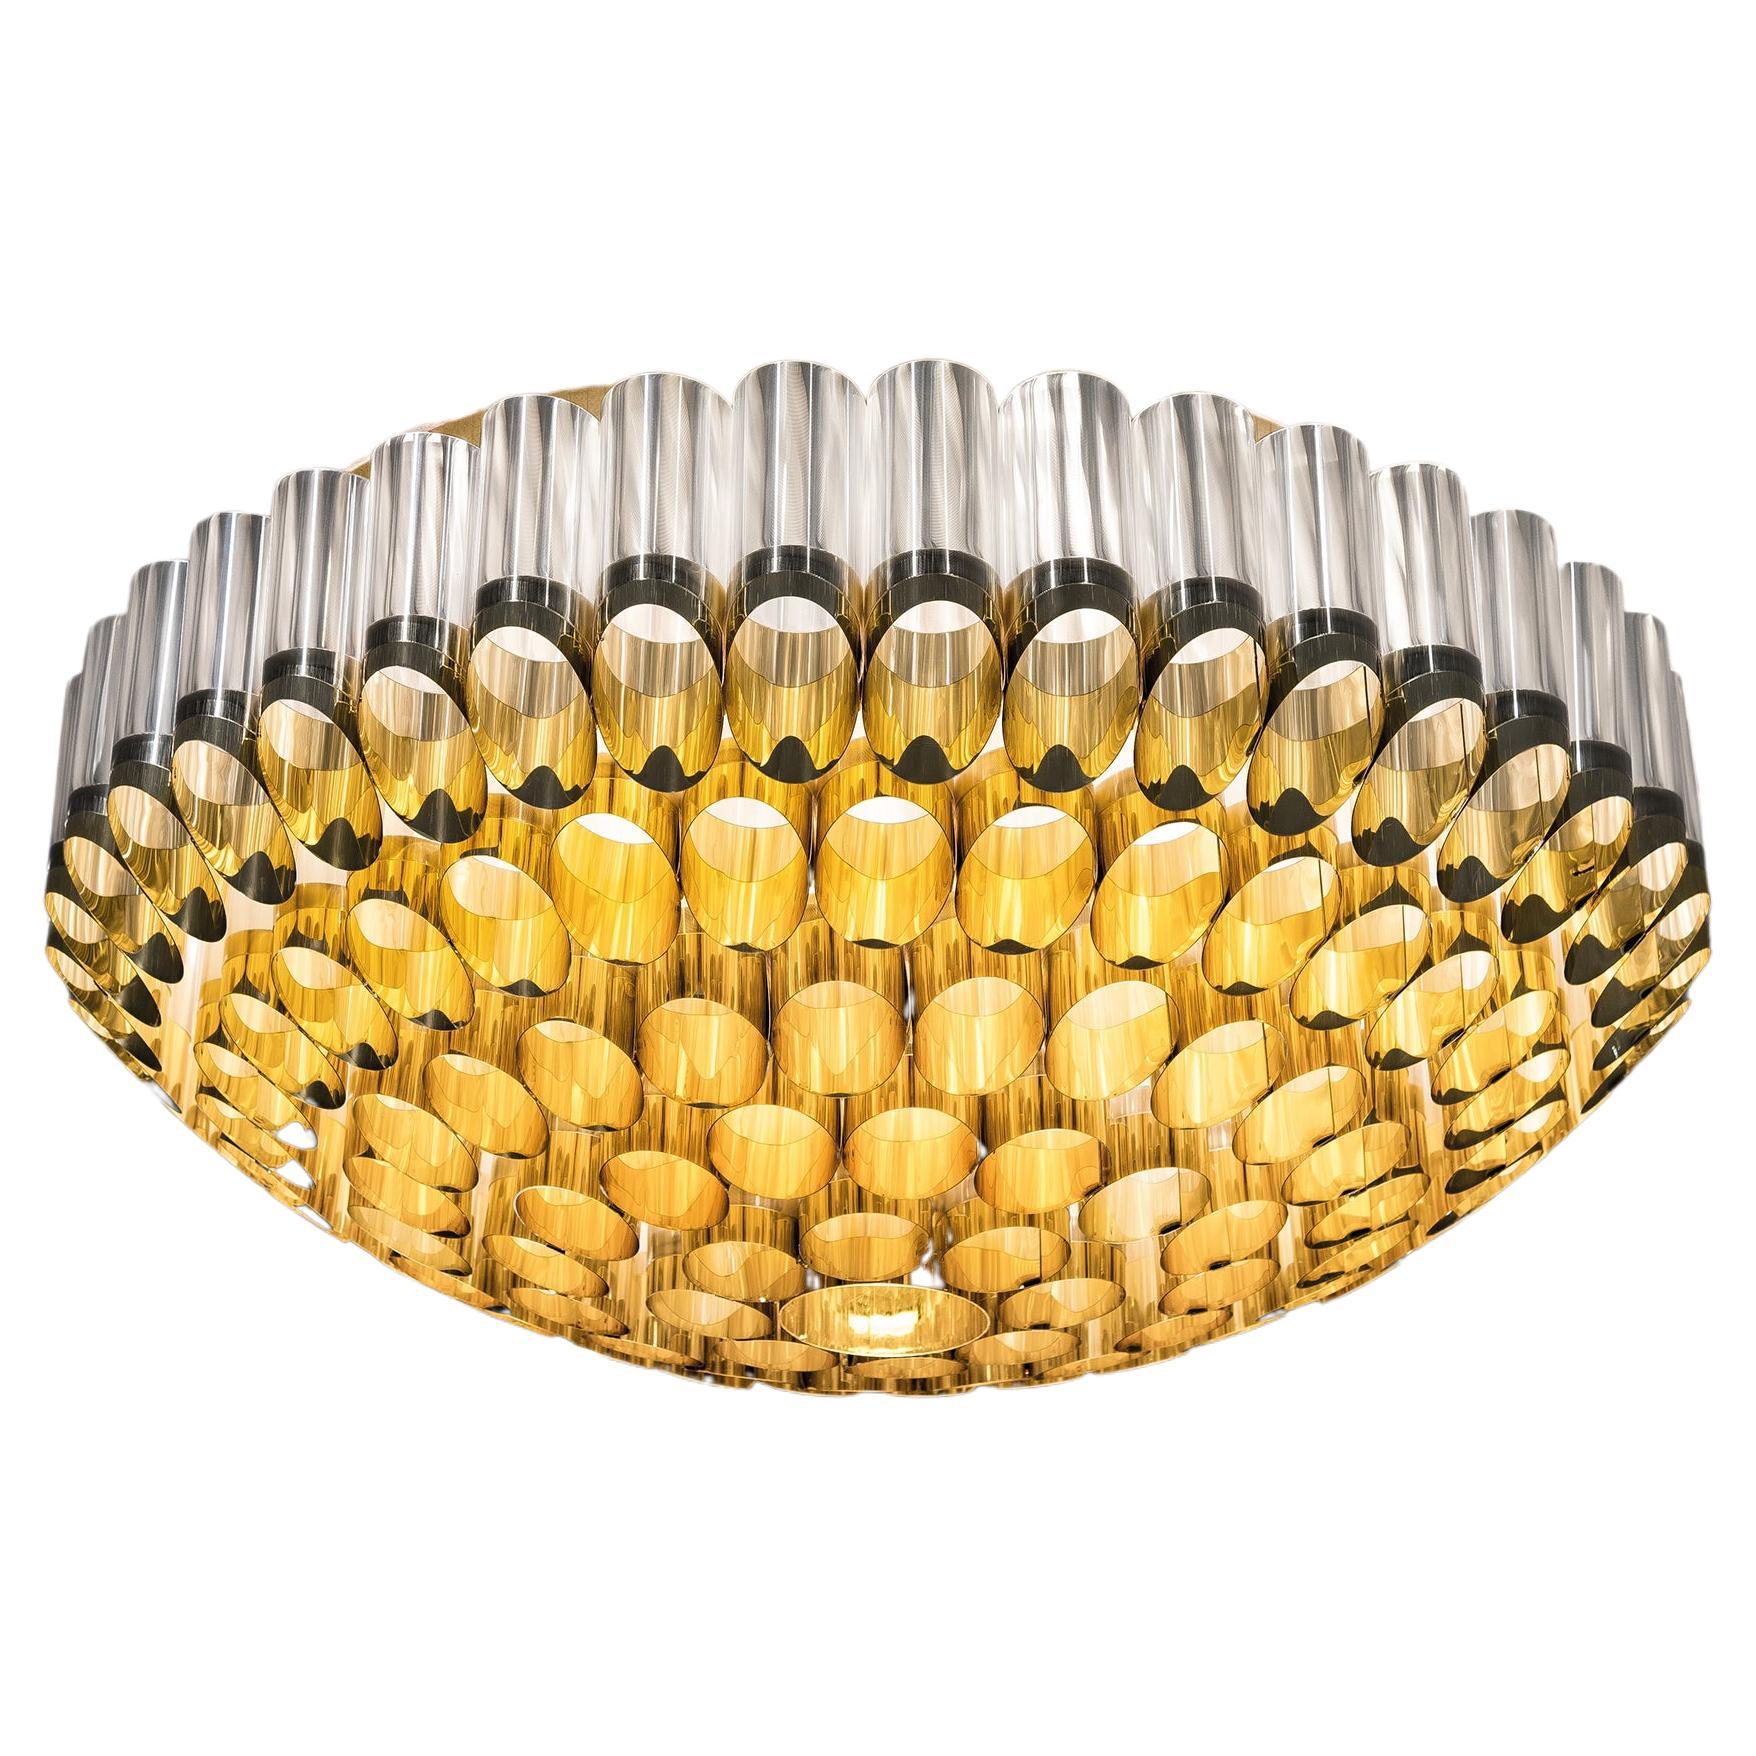 Slamp Odeon 100 Ceiling - Gold Ceiling Light by Lorenza Bozzoli For Sale